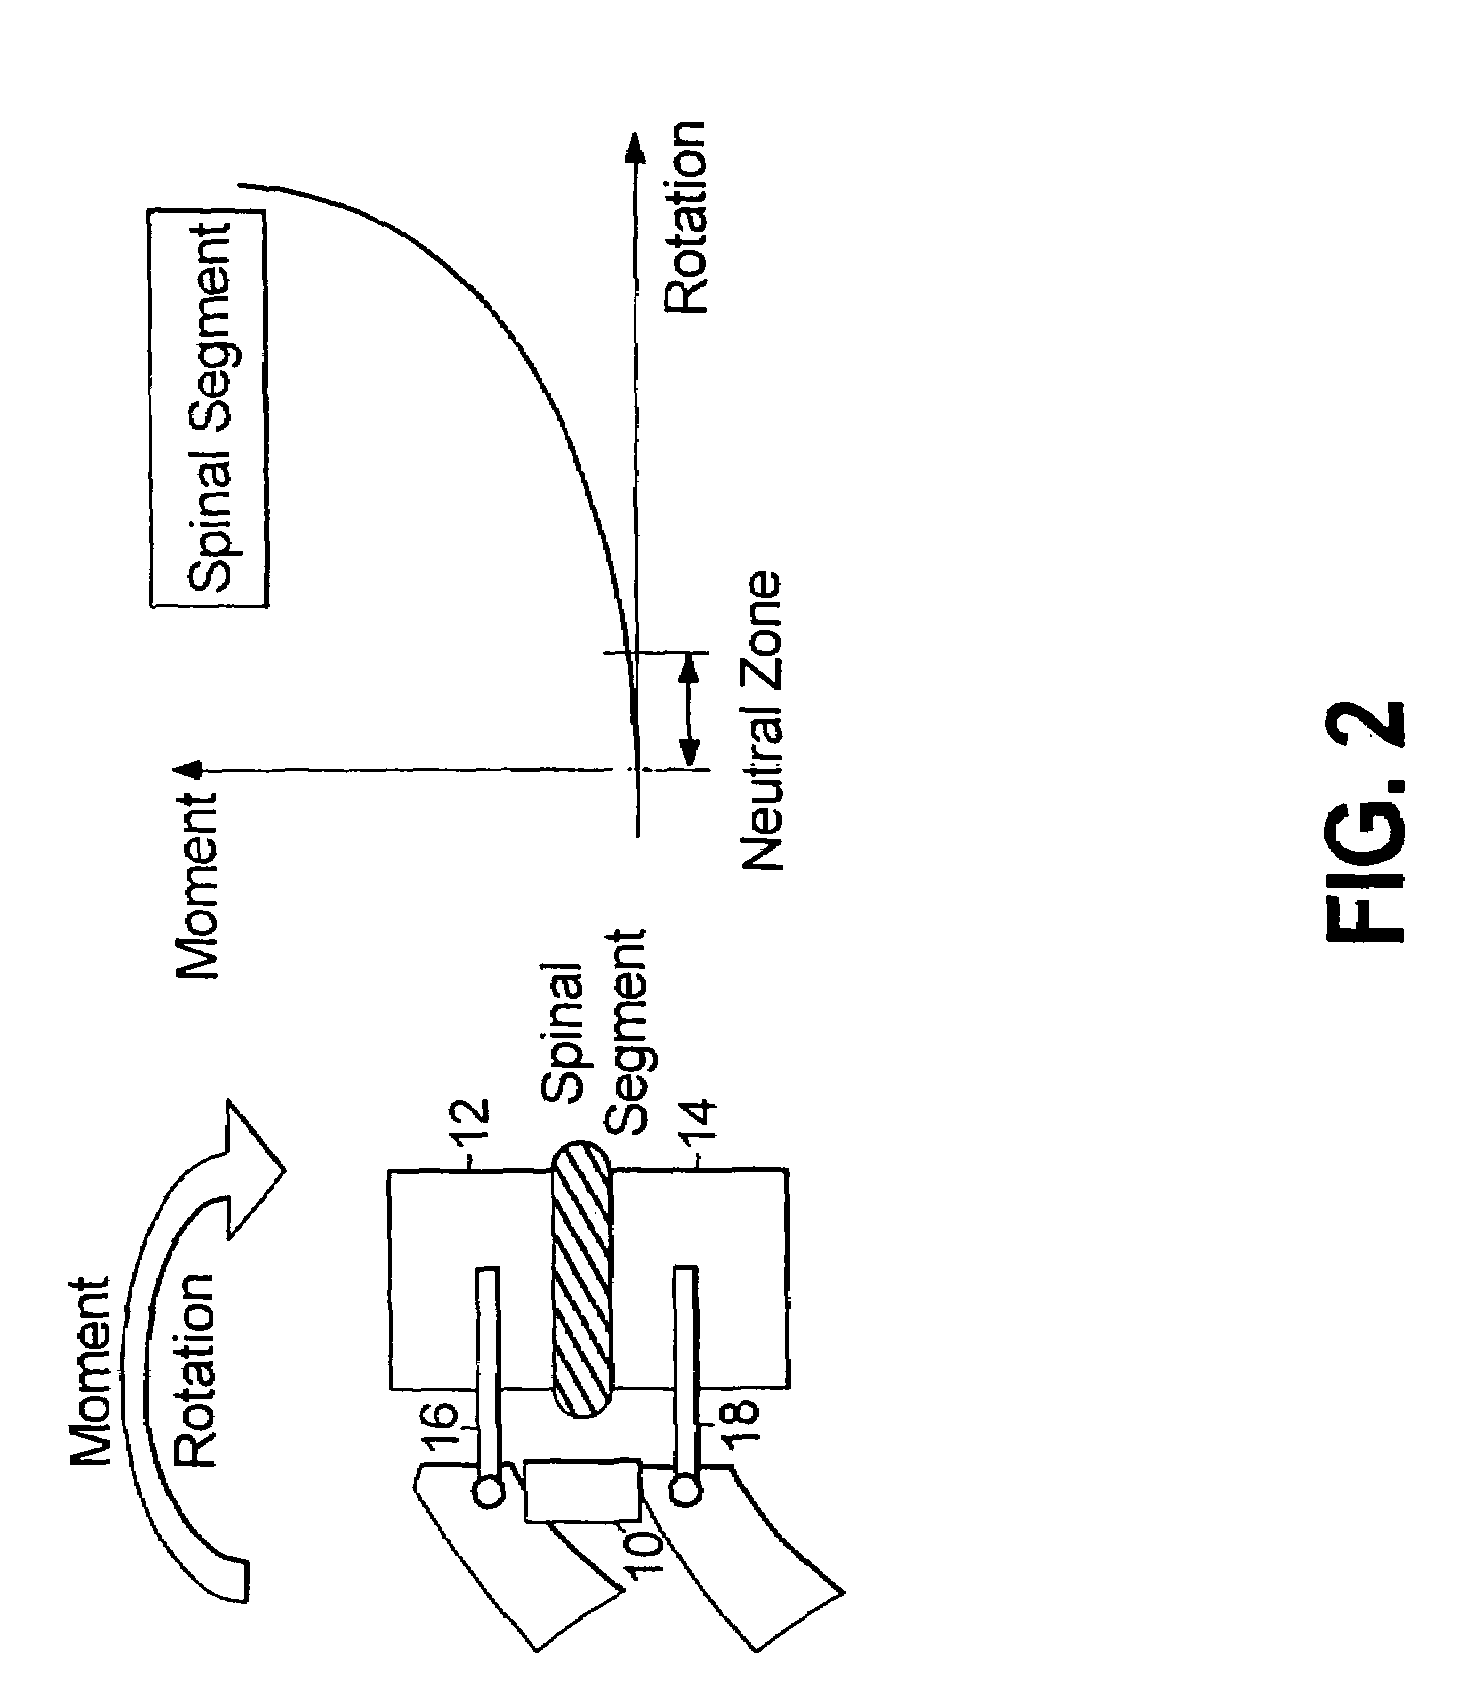 Pedicle screw assembly with bearing surfaces